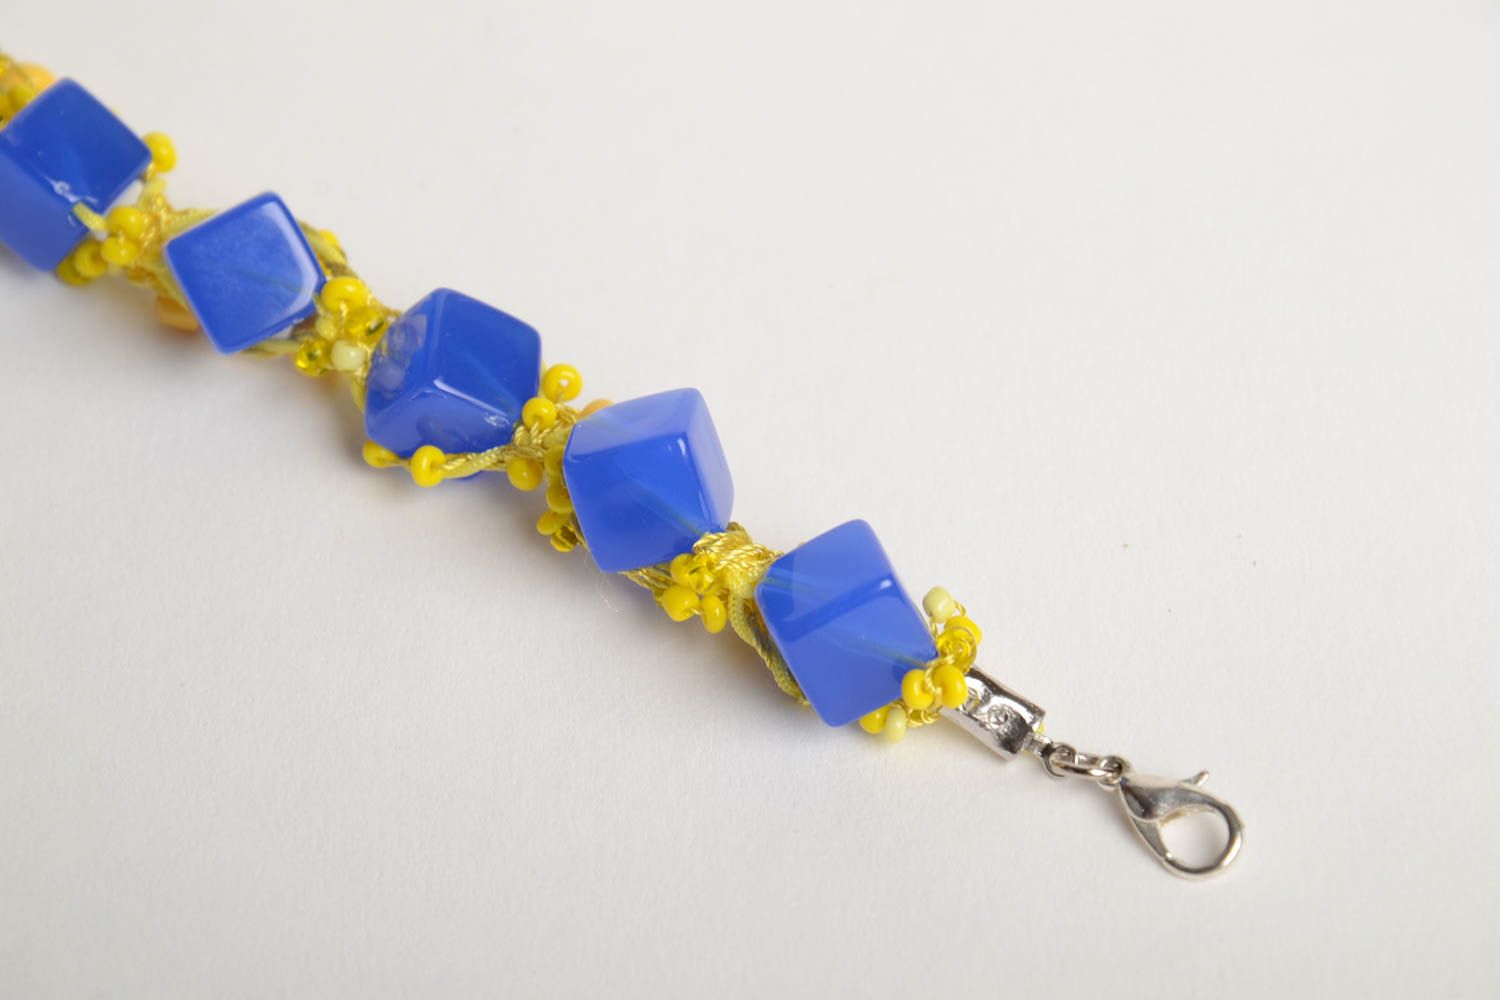 Handmade wrist bracelet crocheted of beads in yellow and blue color combination photo 5